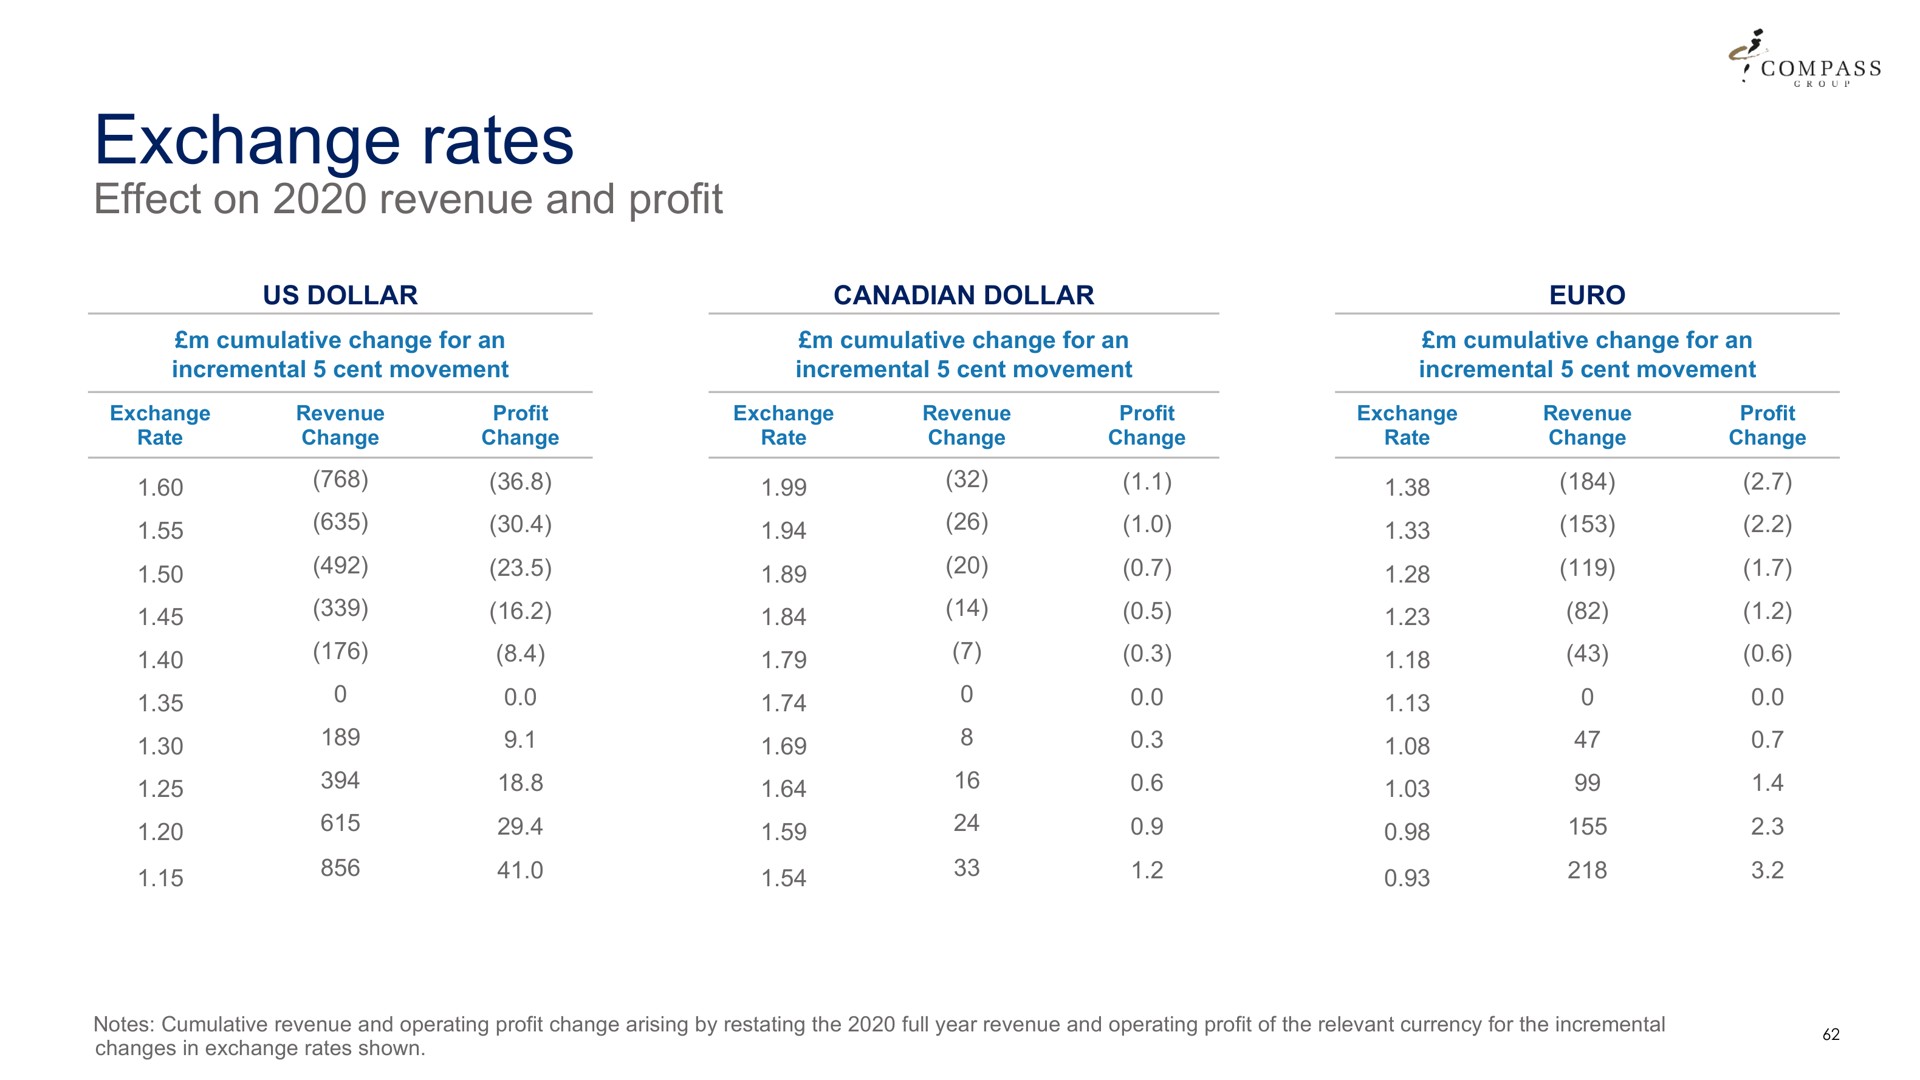 exchange rates effect on revenue and profit | Compass Group